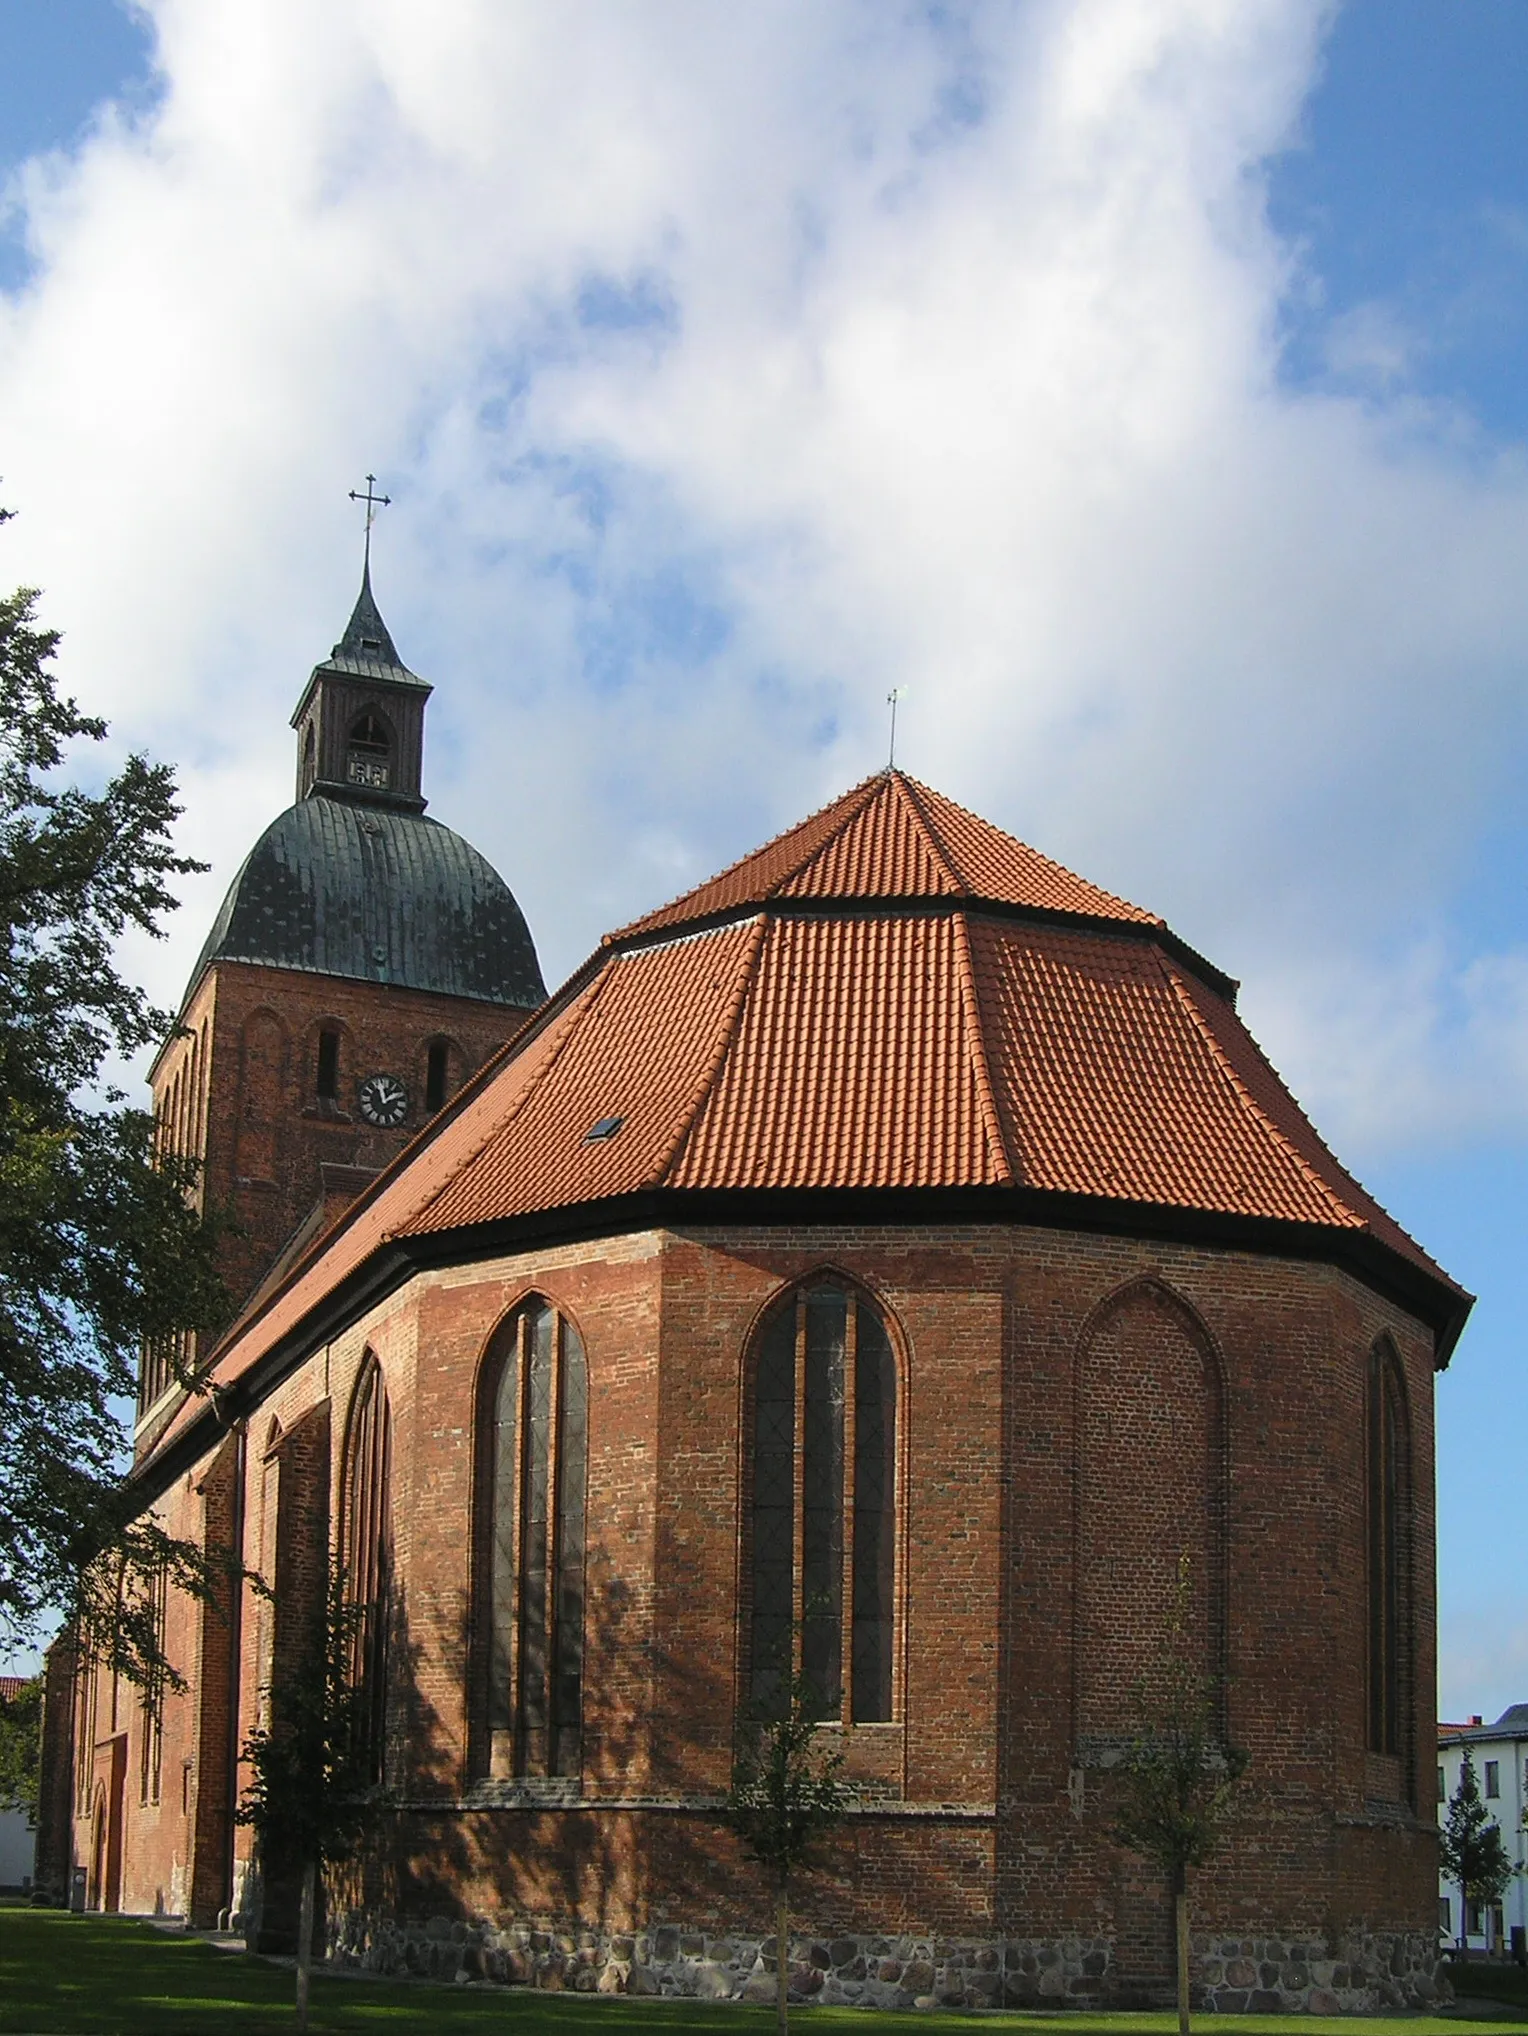 Photo showing: This image shows the St. Mary's Church in Ribnitz-Damgarten.